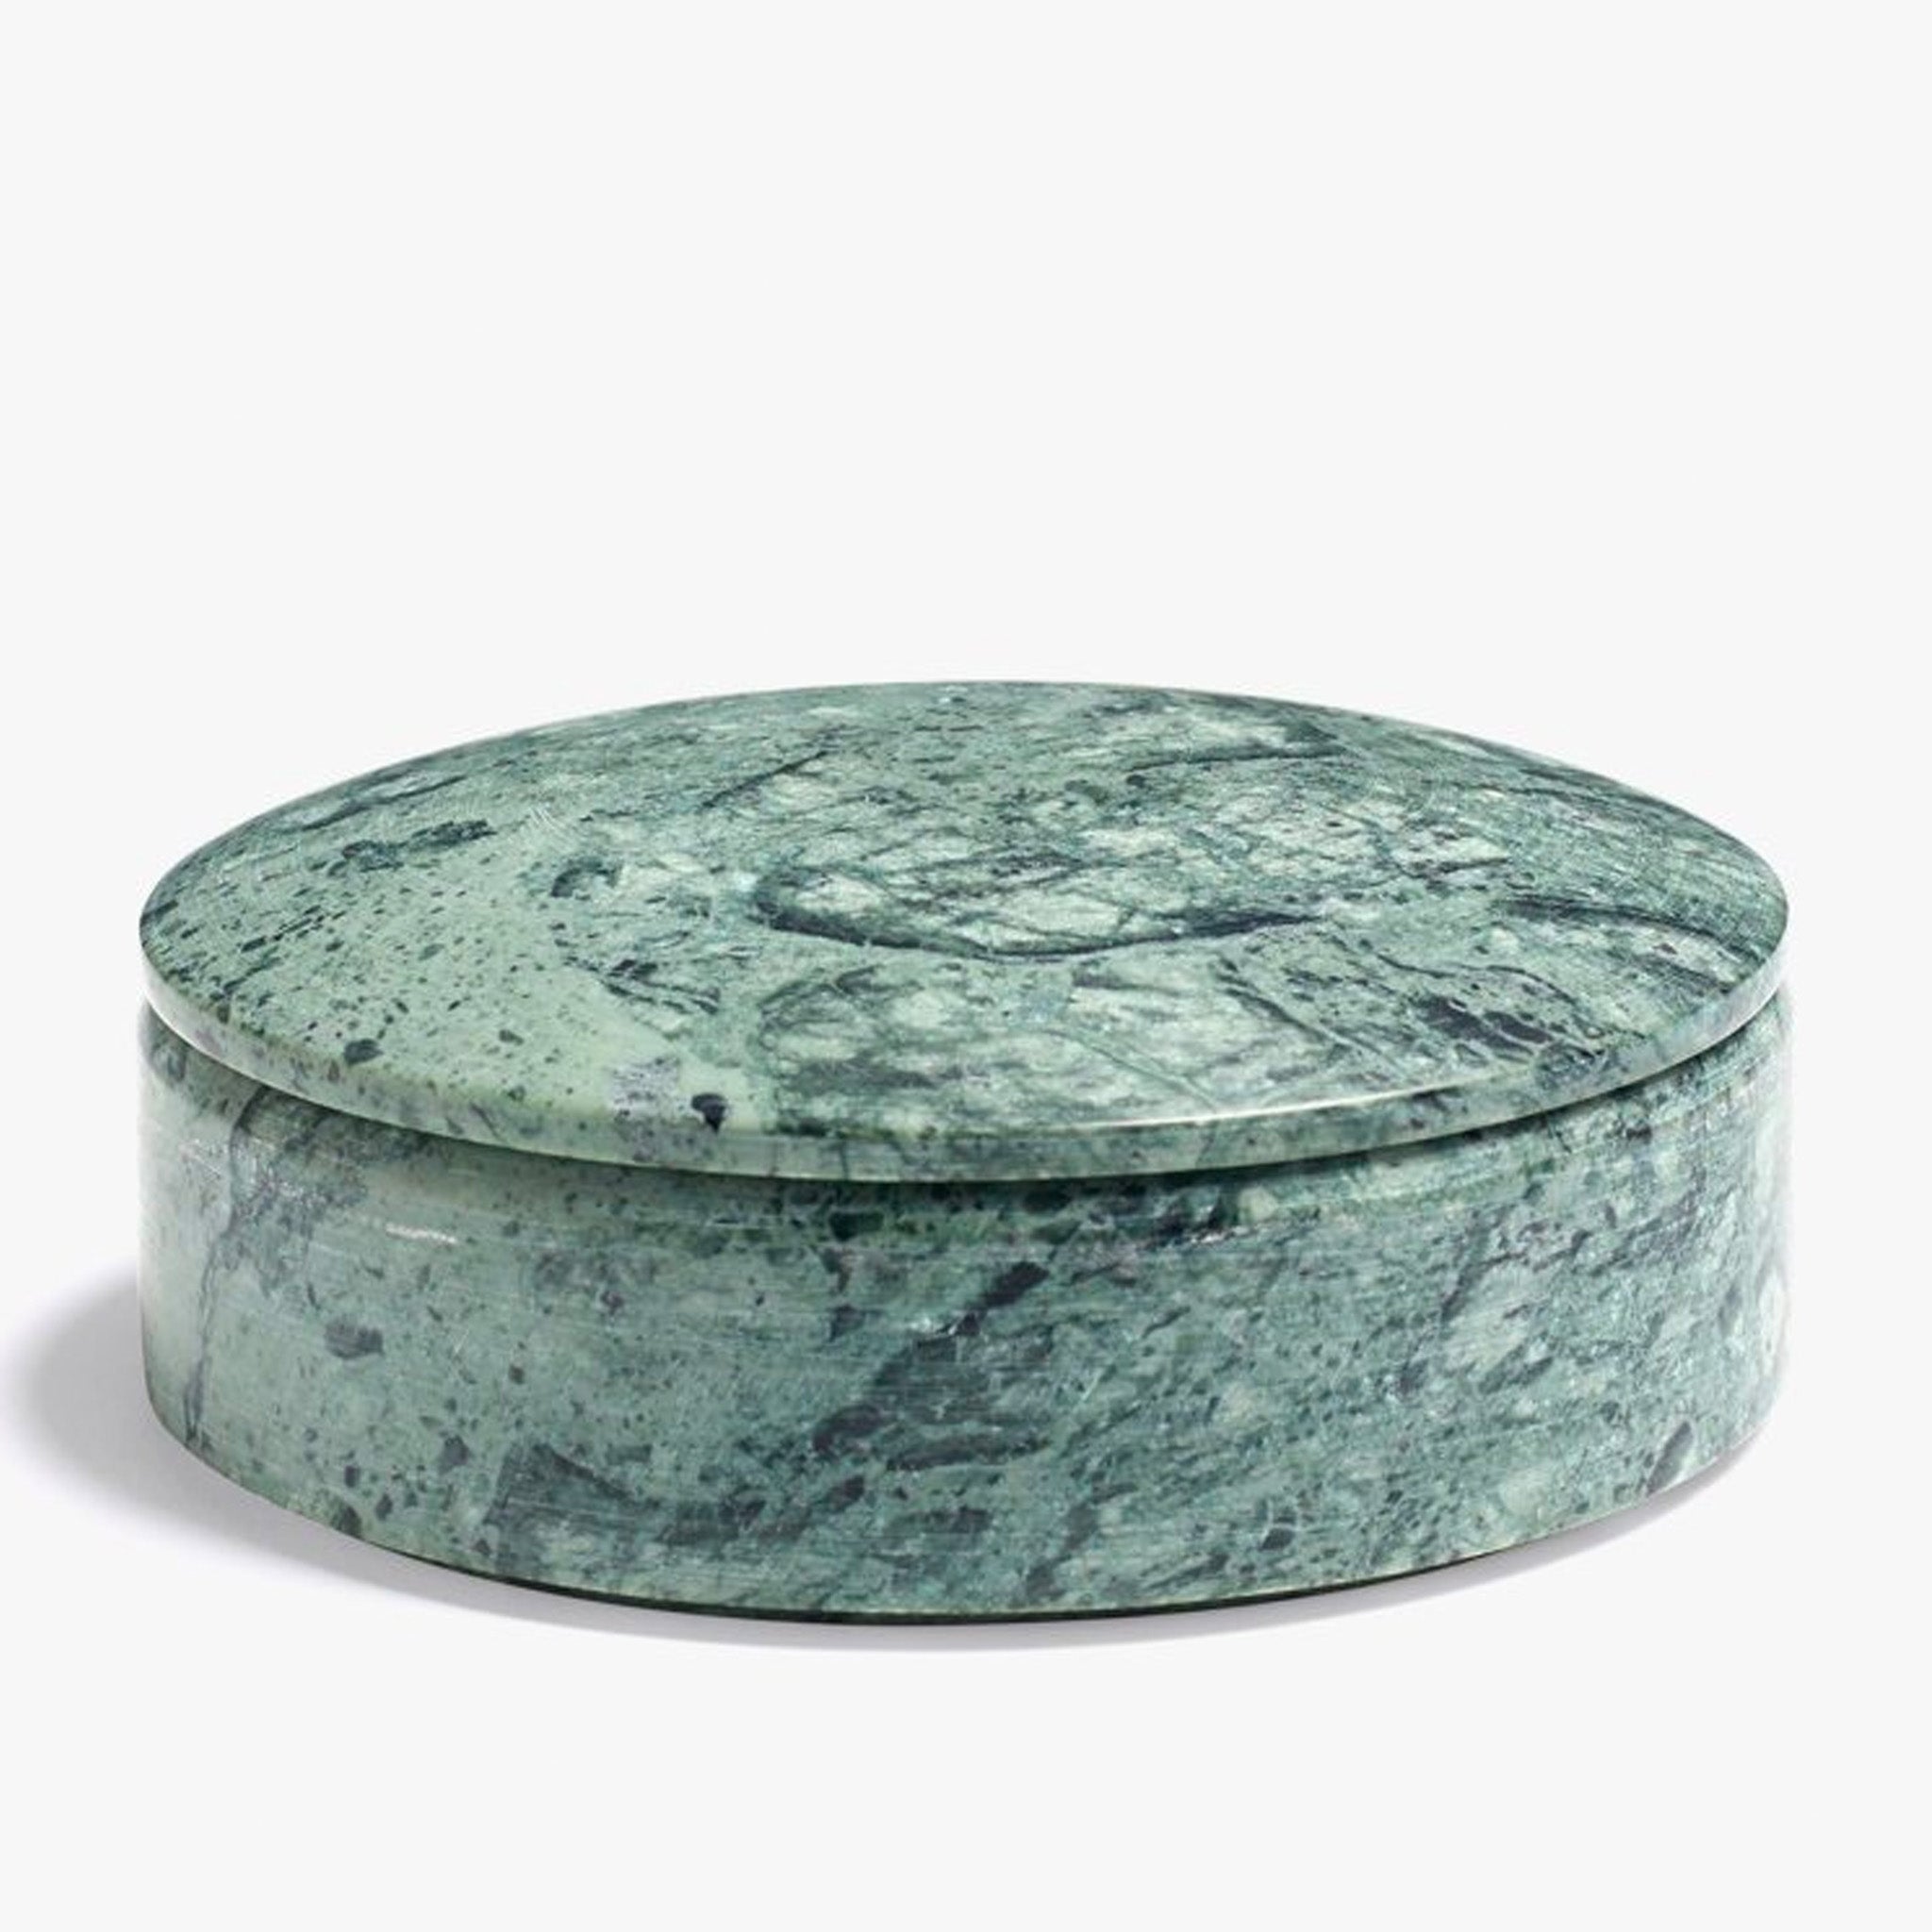 Clearance Lens Box / Large / Green Marble by Thomas Jenkins